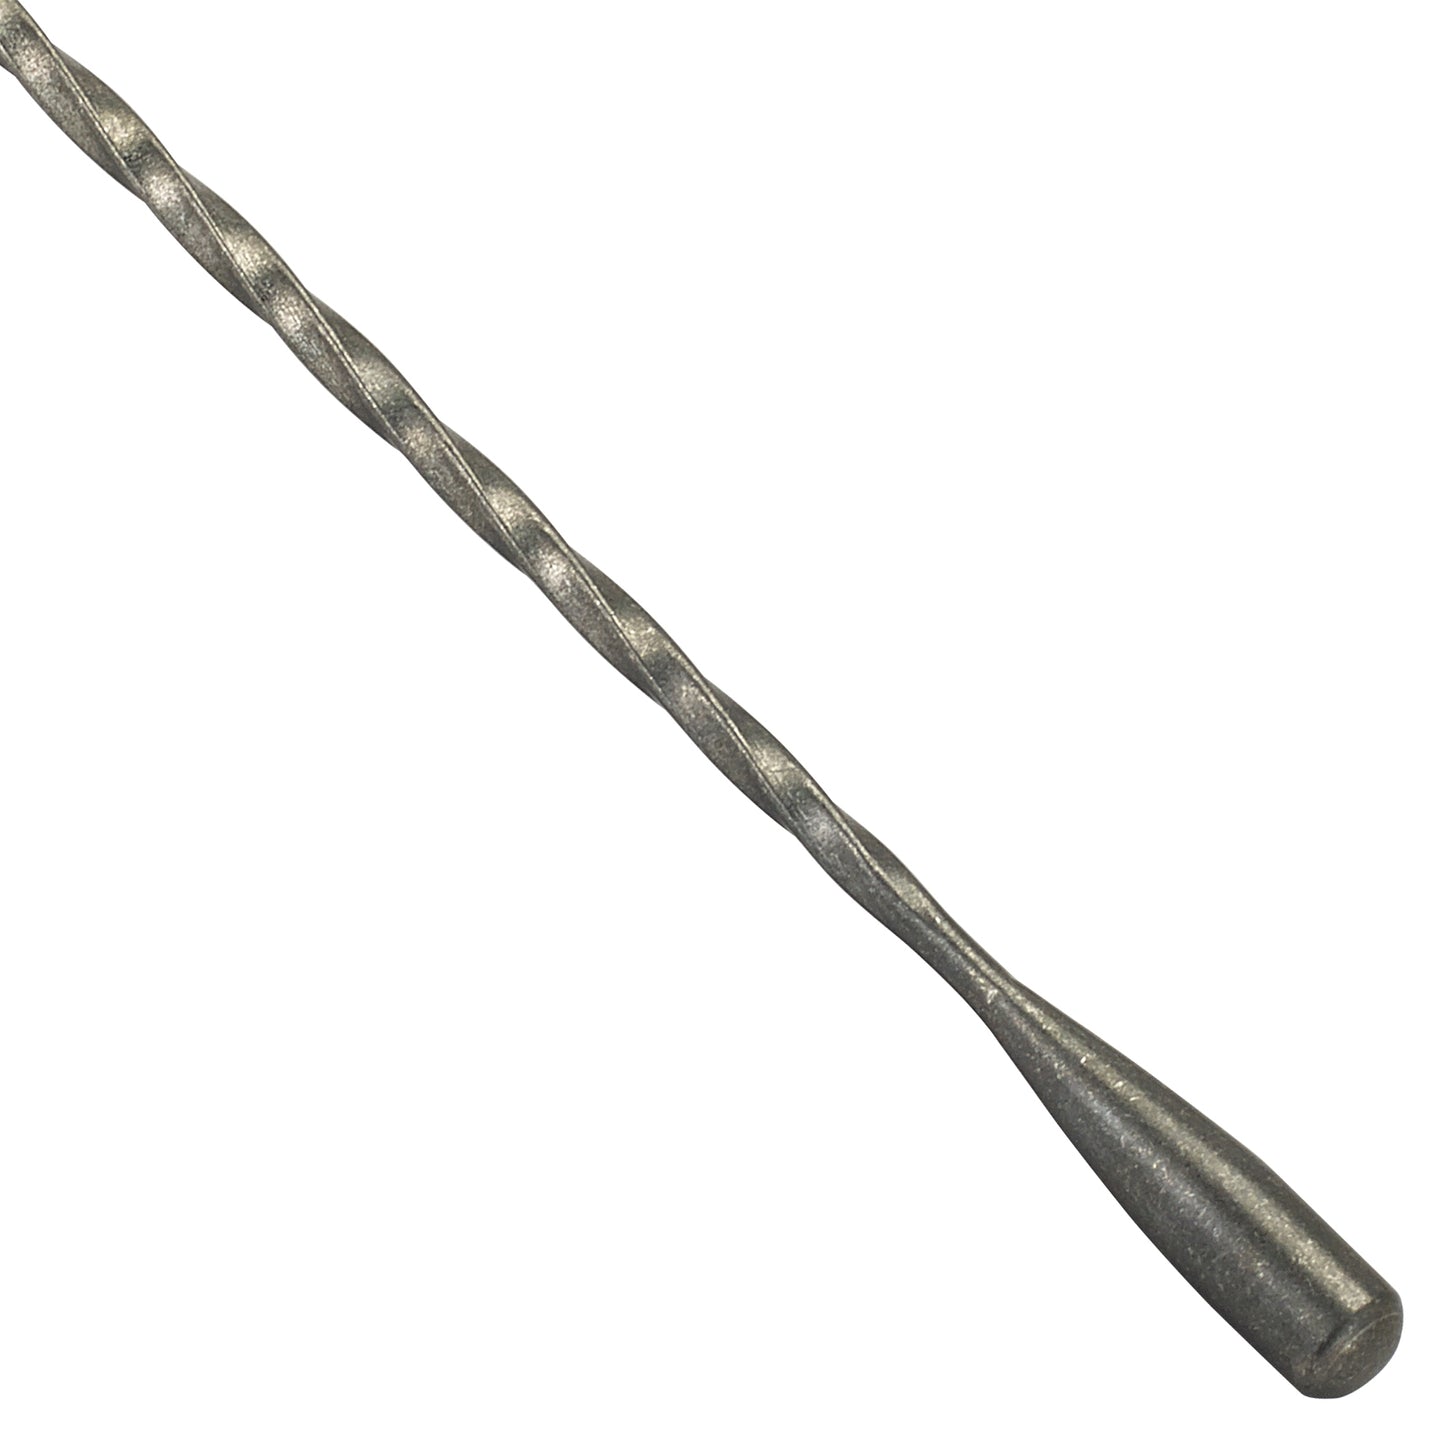 BABS-12CS - After5 Bar Spoon, Crafted Steel